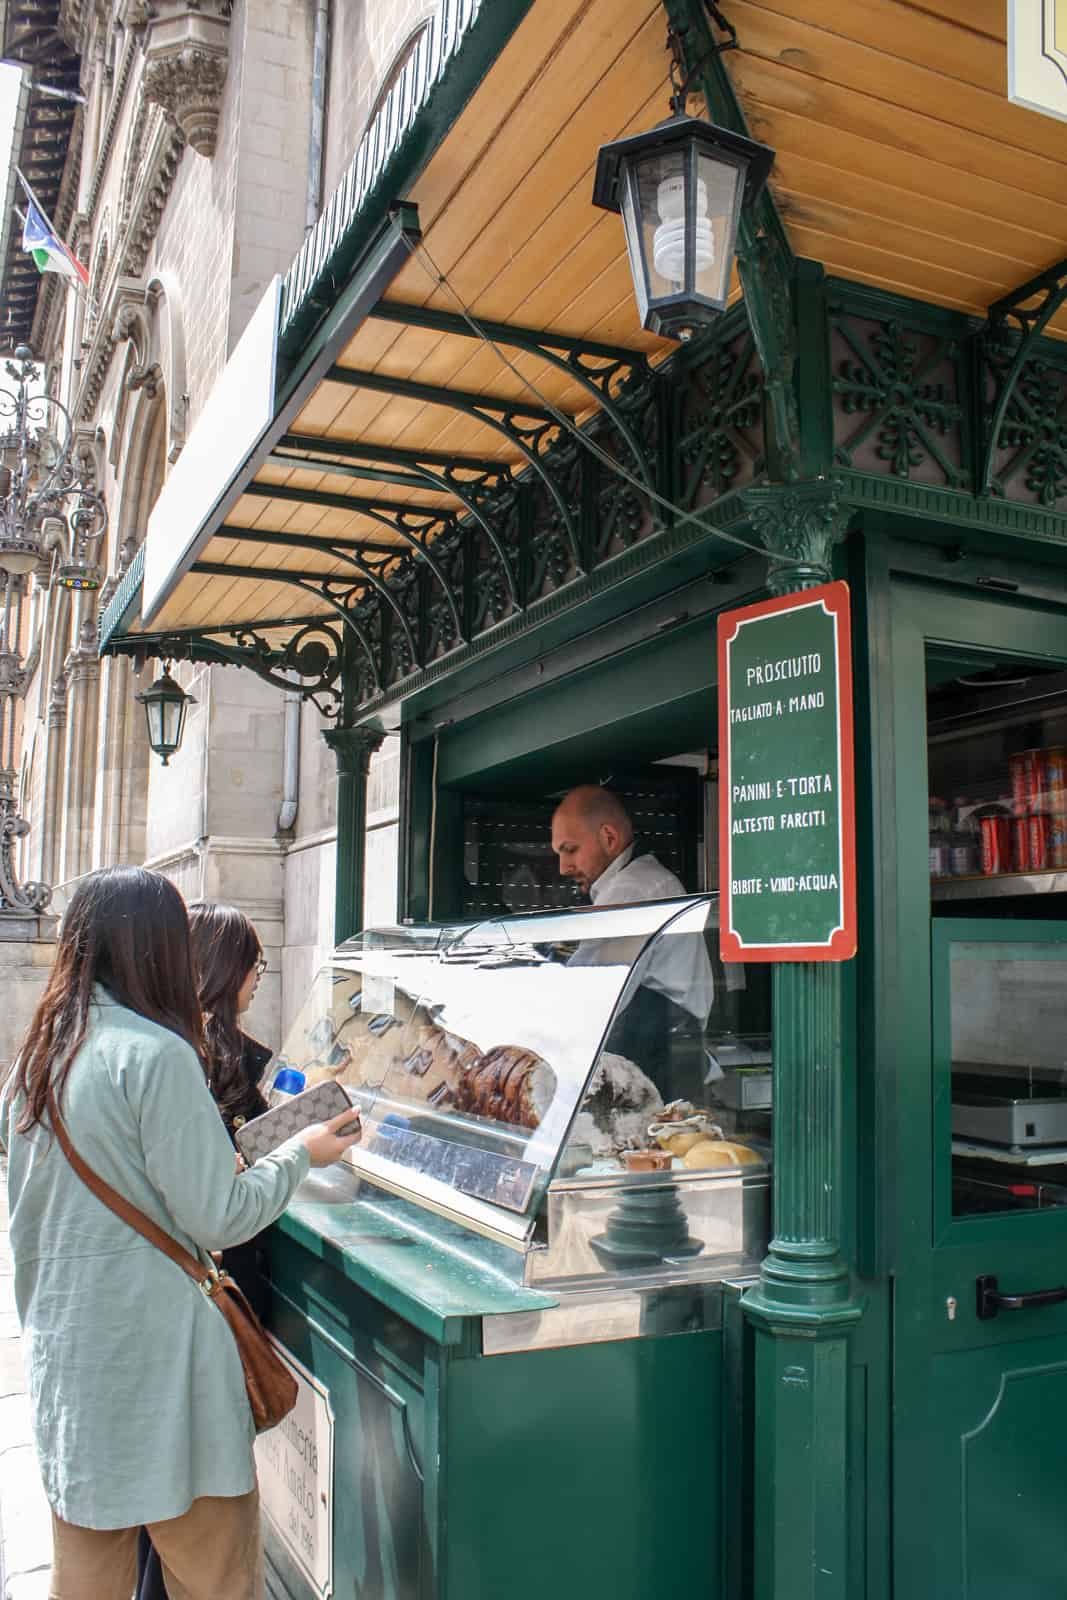 A man serves food to two customers from a green booth in Perugia, Italy. 